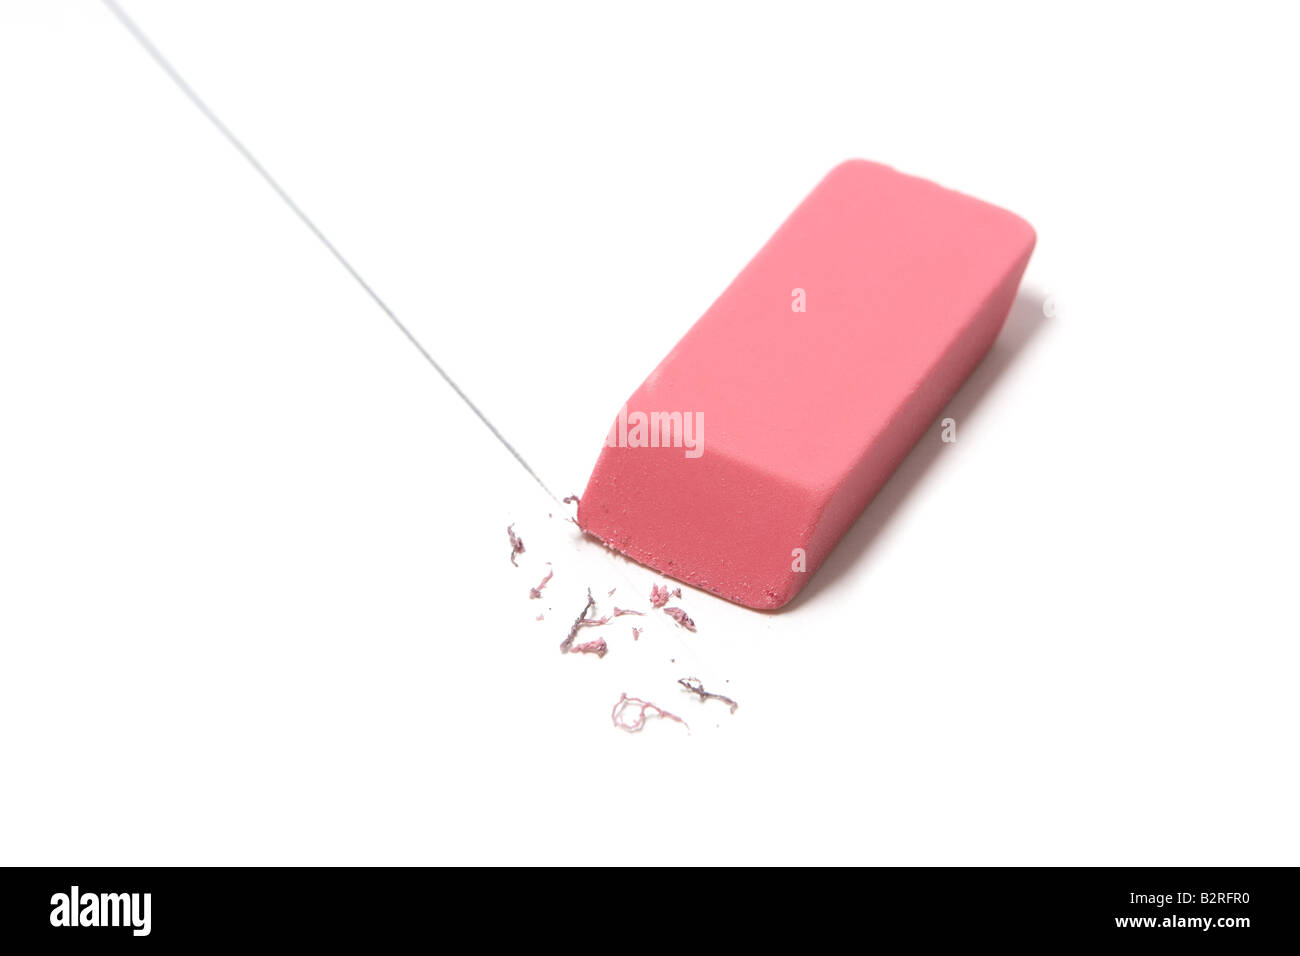 Still life showing a common school supply a standard pink eraser erasing a pencil line  Stock Photo